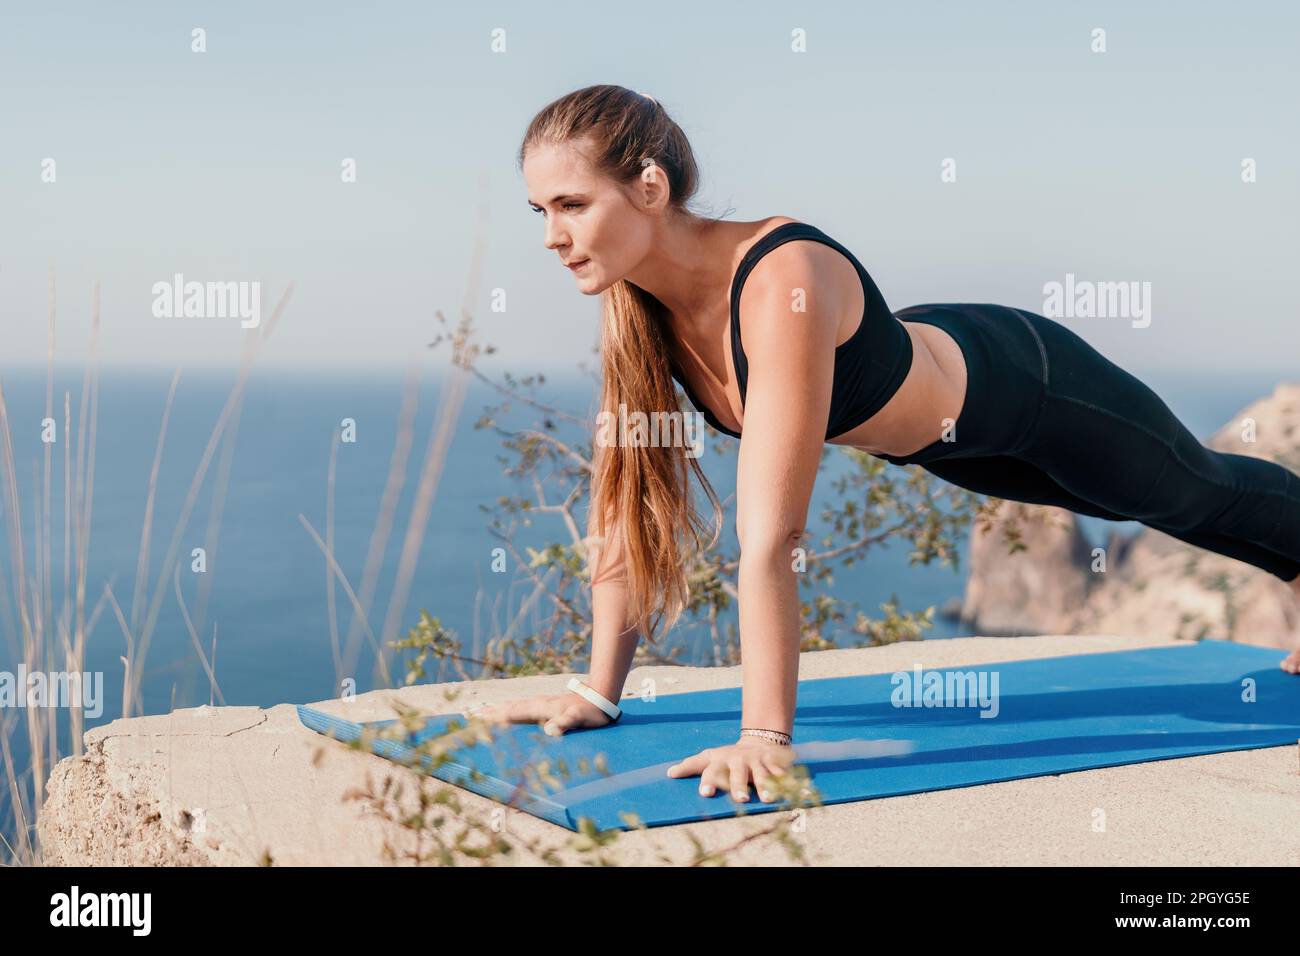 Fitness woman sea. Outdoor workout on yoga mat roller in park near to ocean beach. Female fitness pilates yoga routine concept. Healthy lifestyle Stock Photo